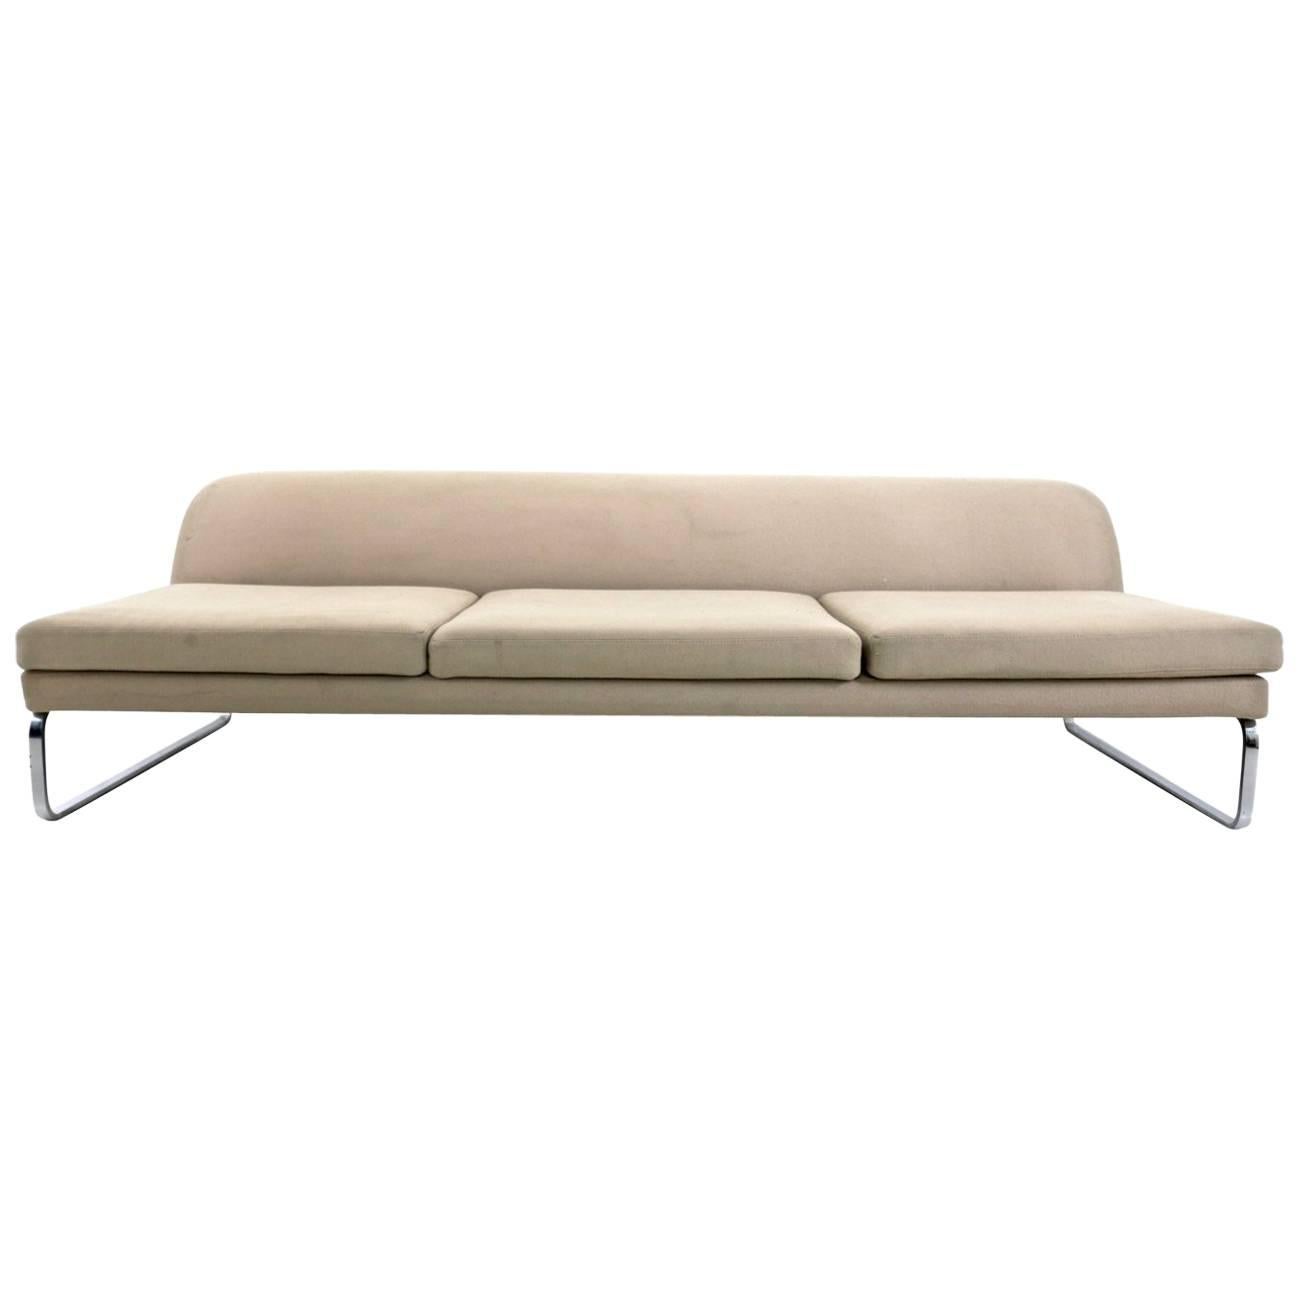 Beige Sofa Designed by Gordon Guillaumier with Fabric by Tacchini, Italy, 2000s